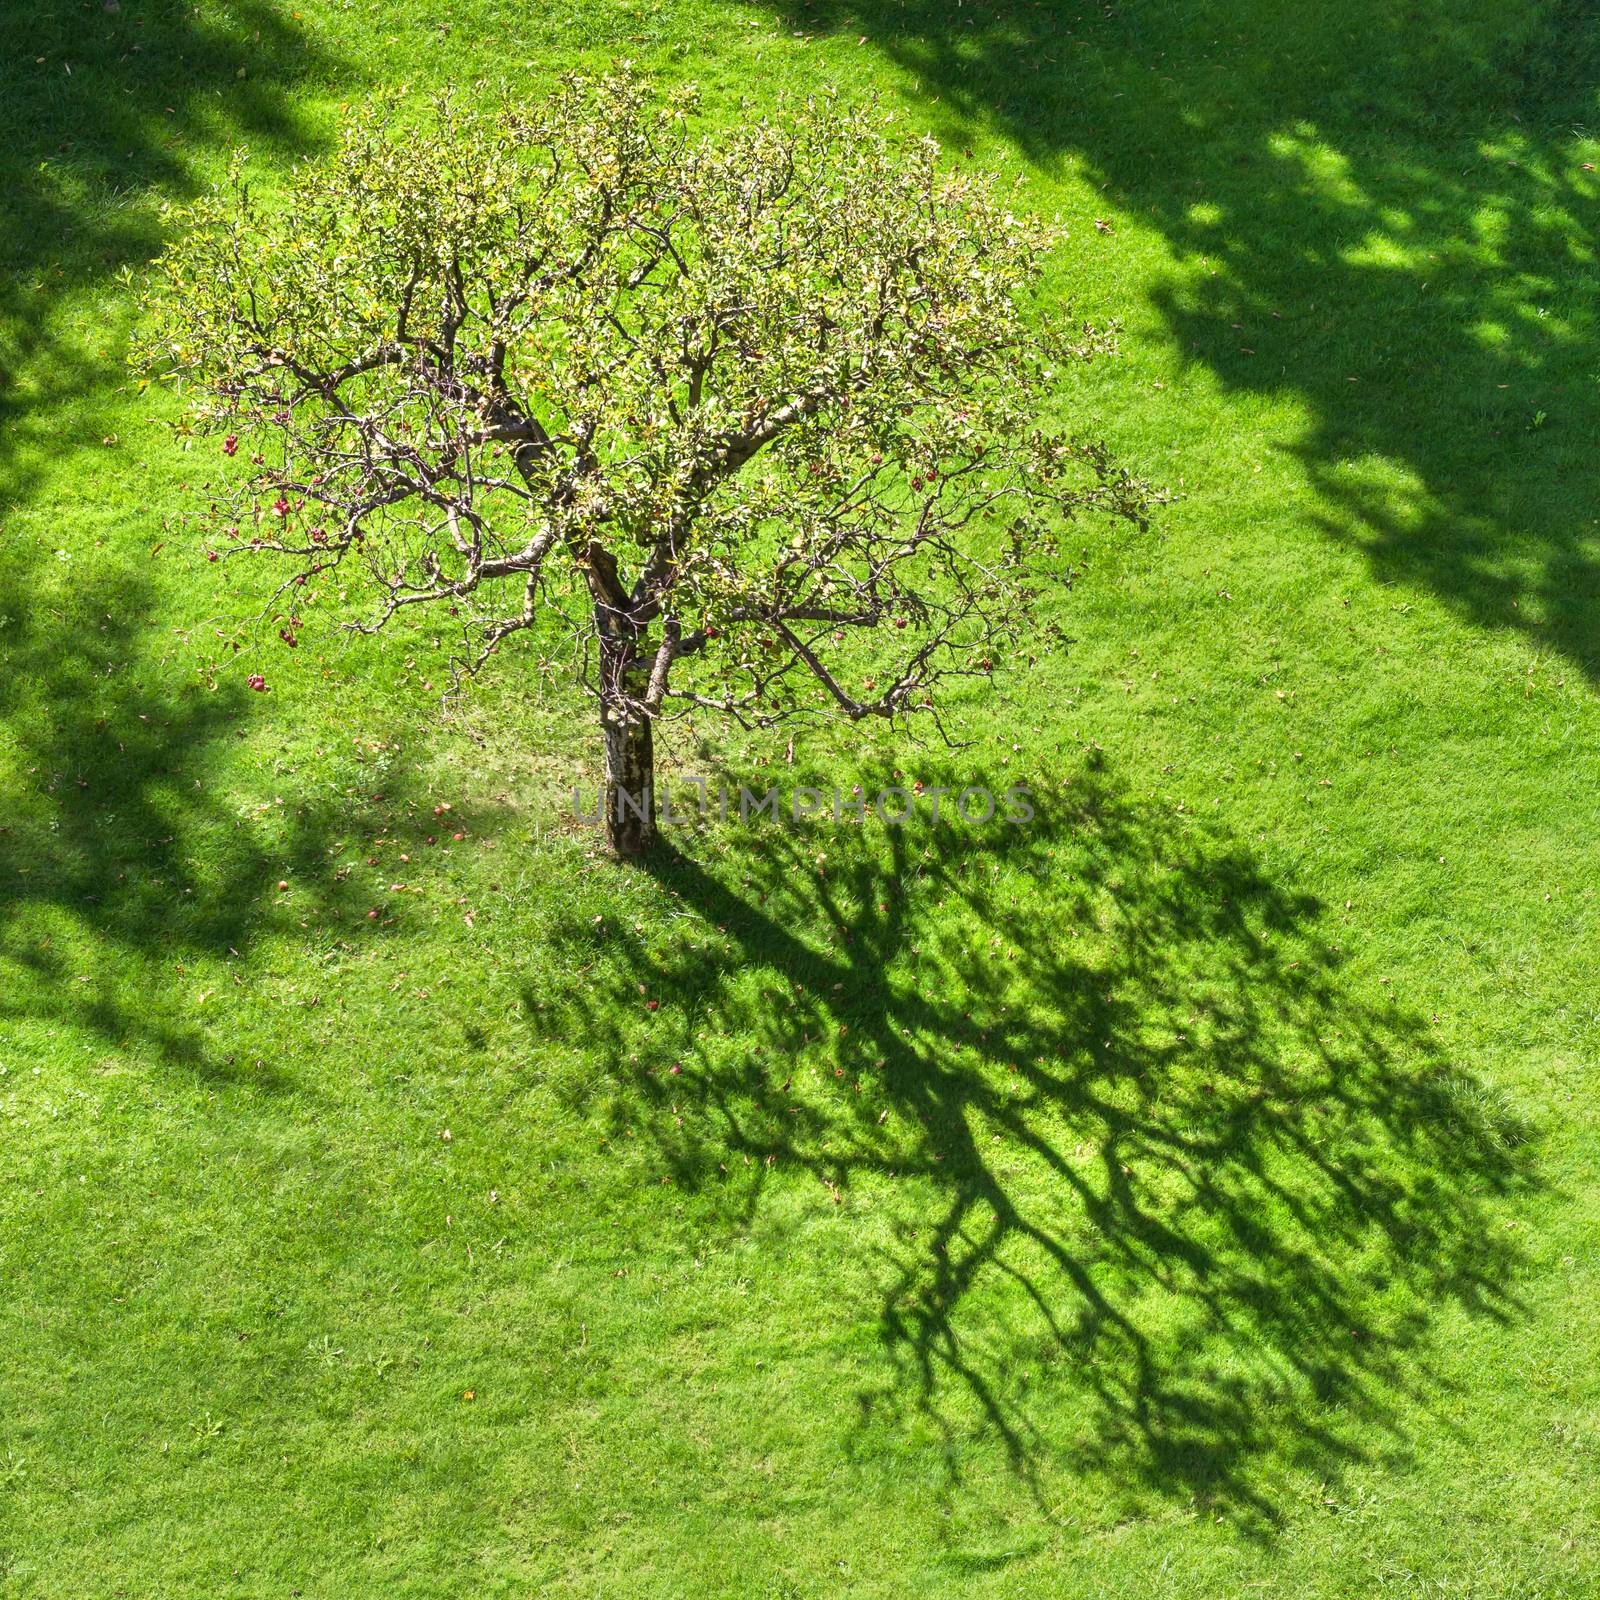 Tree with abstract shadow on grass by germanopoli